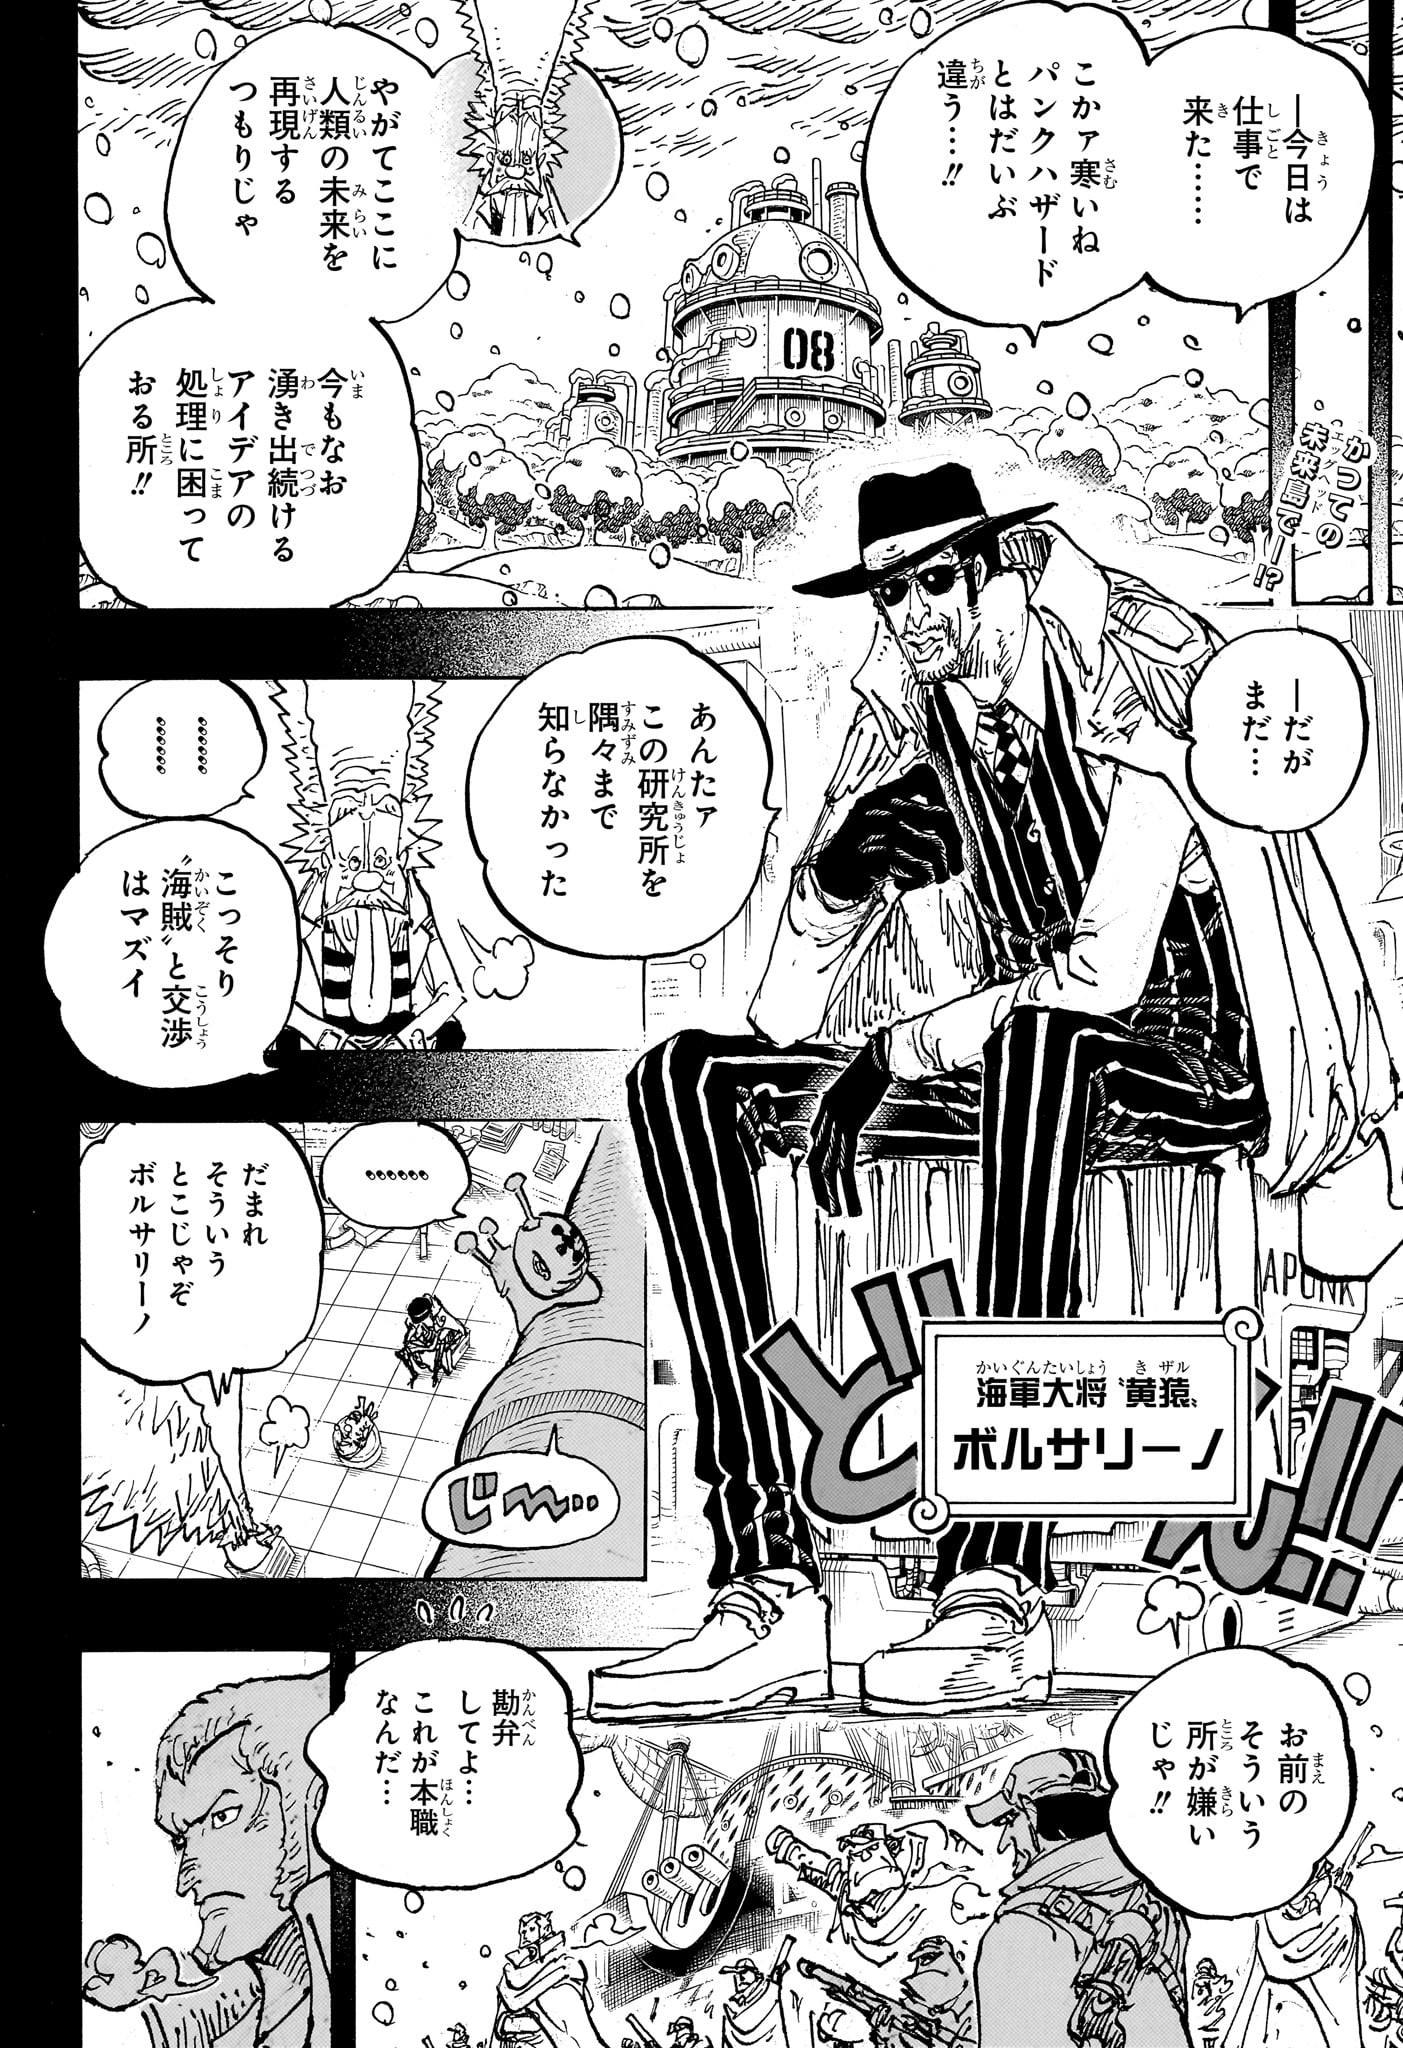 One Piece - Chapter 1100 - Page 2